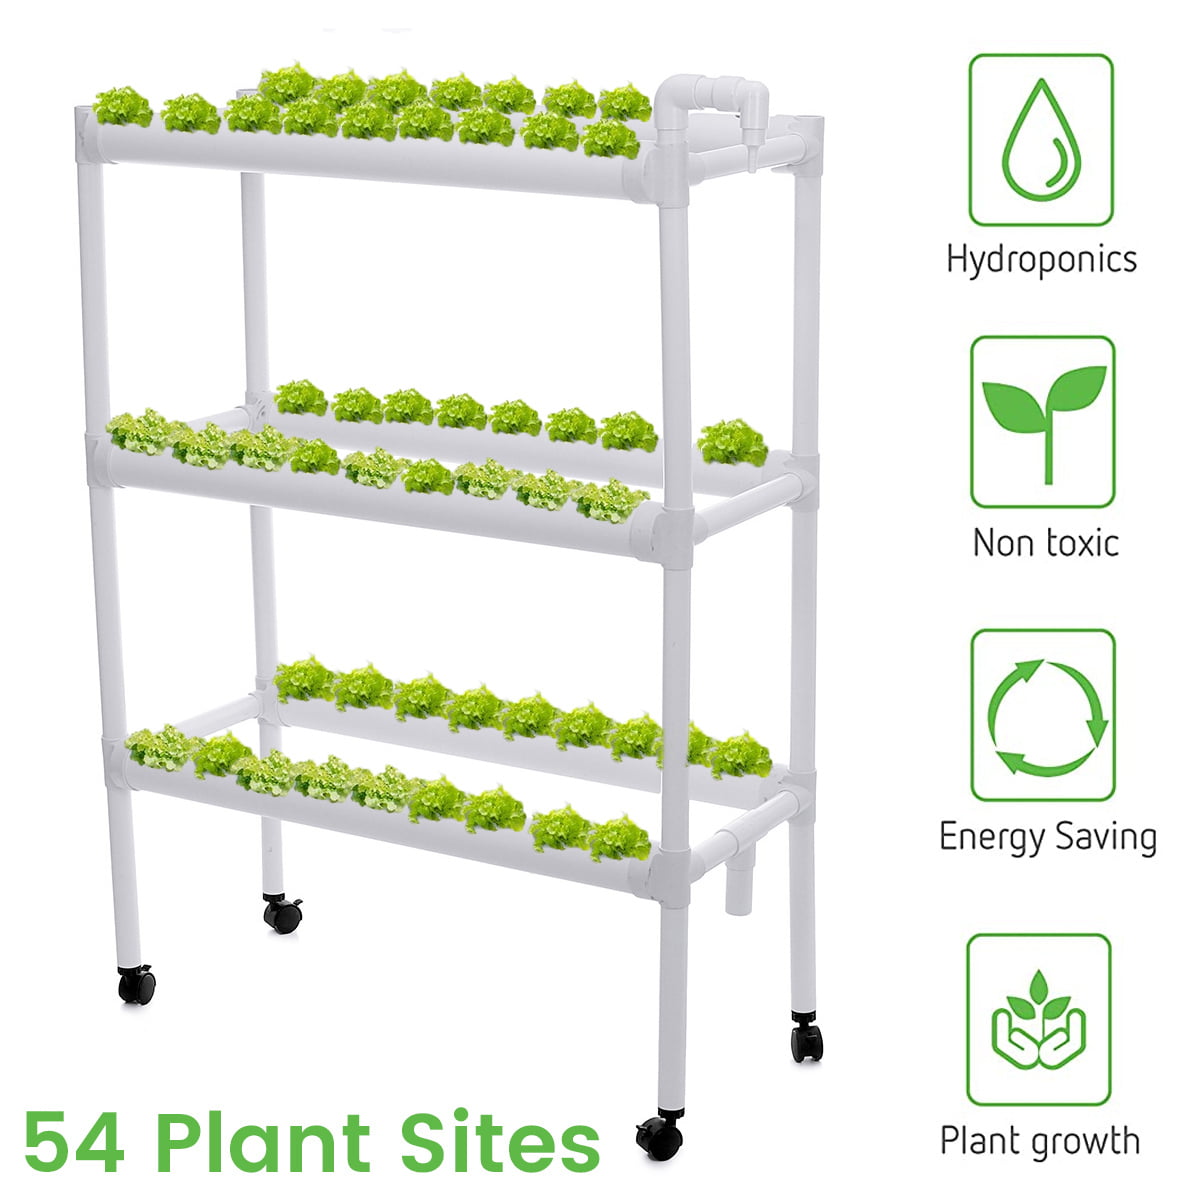 Grow Organically Hydroponic 54 Wall Mounted Plant Growing System now available 